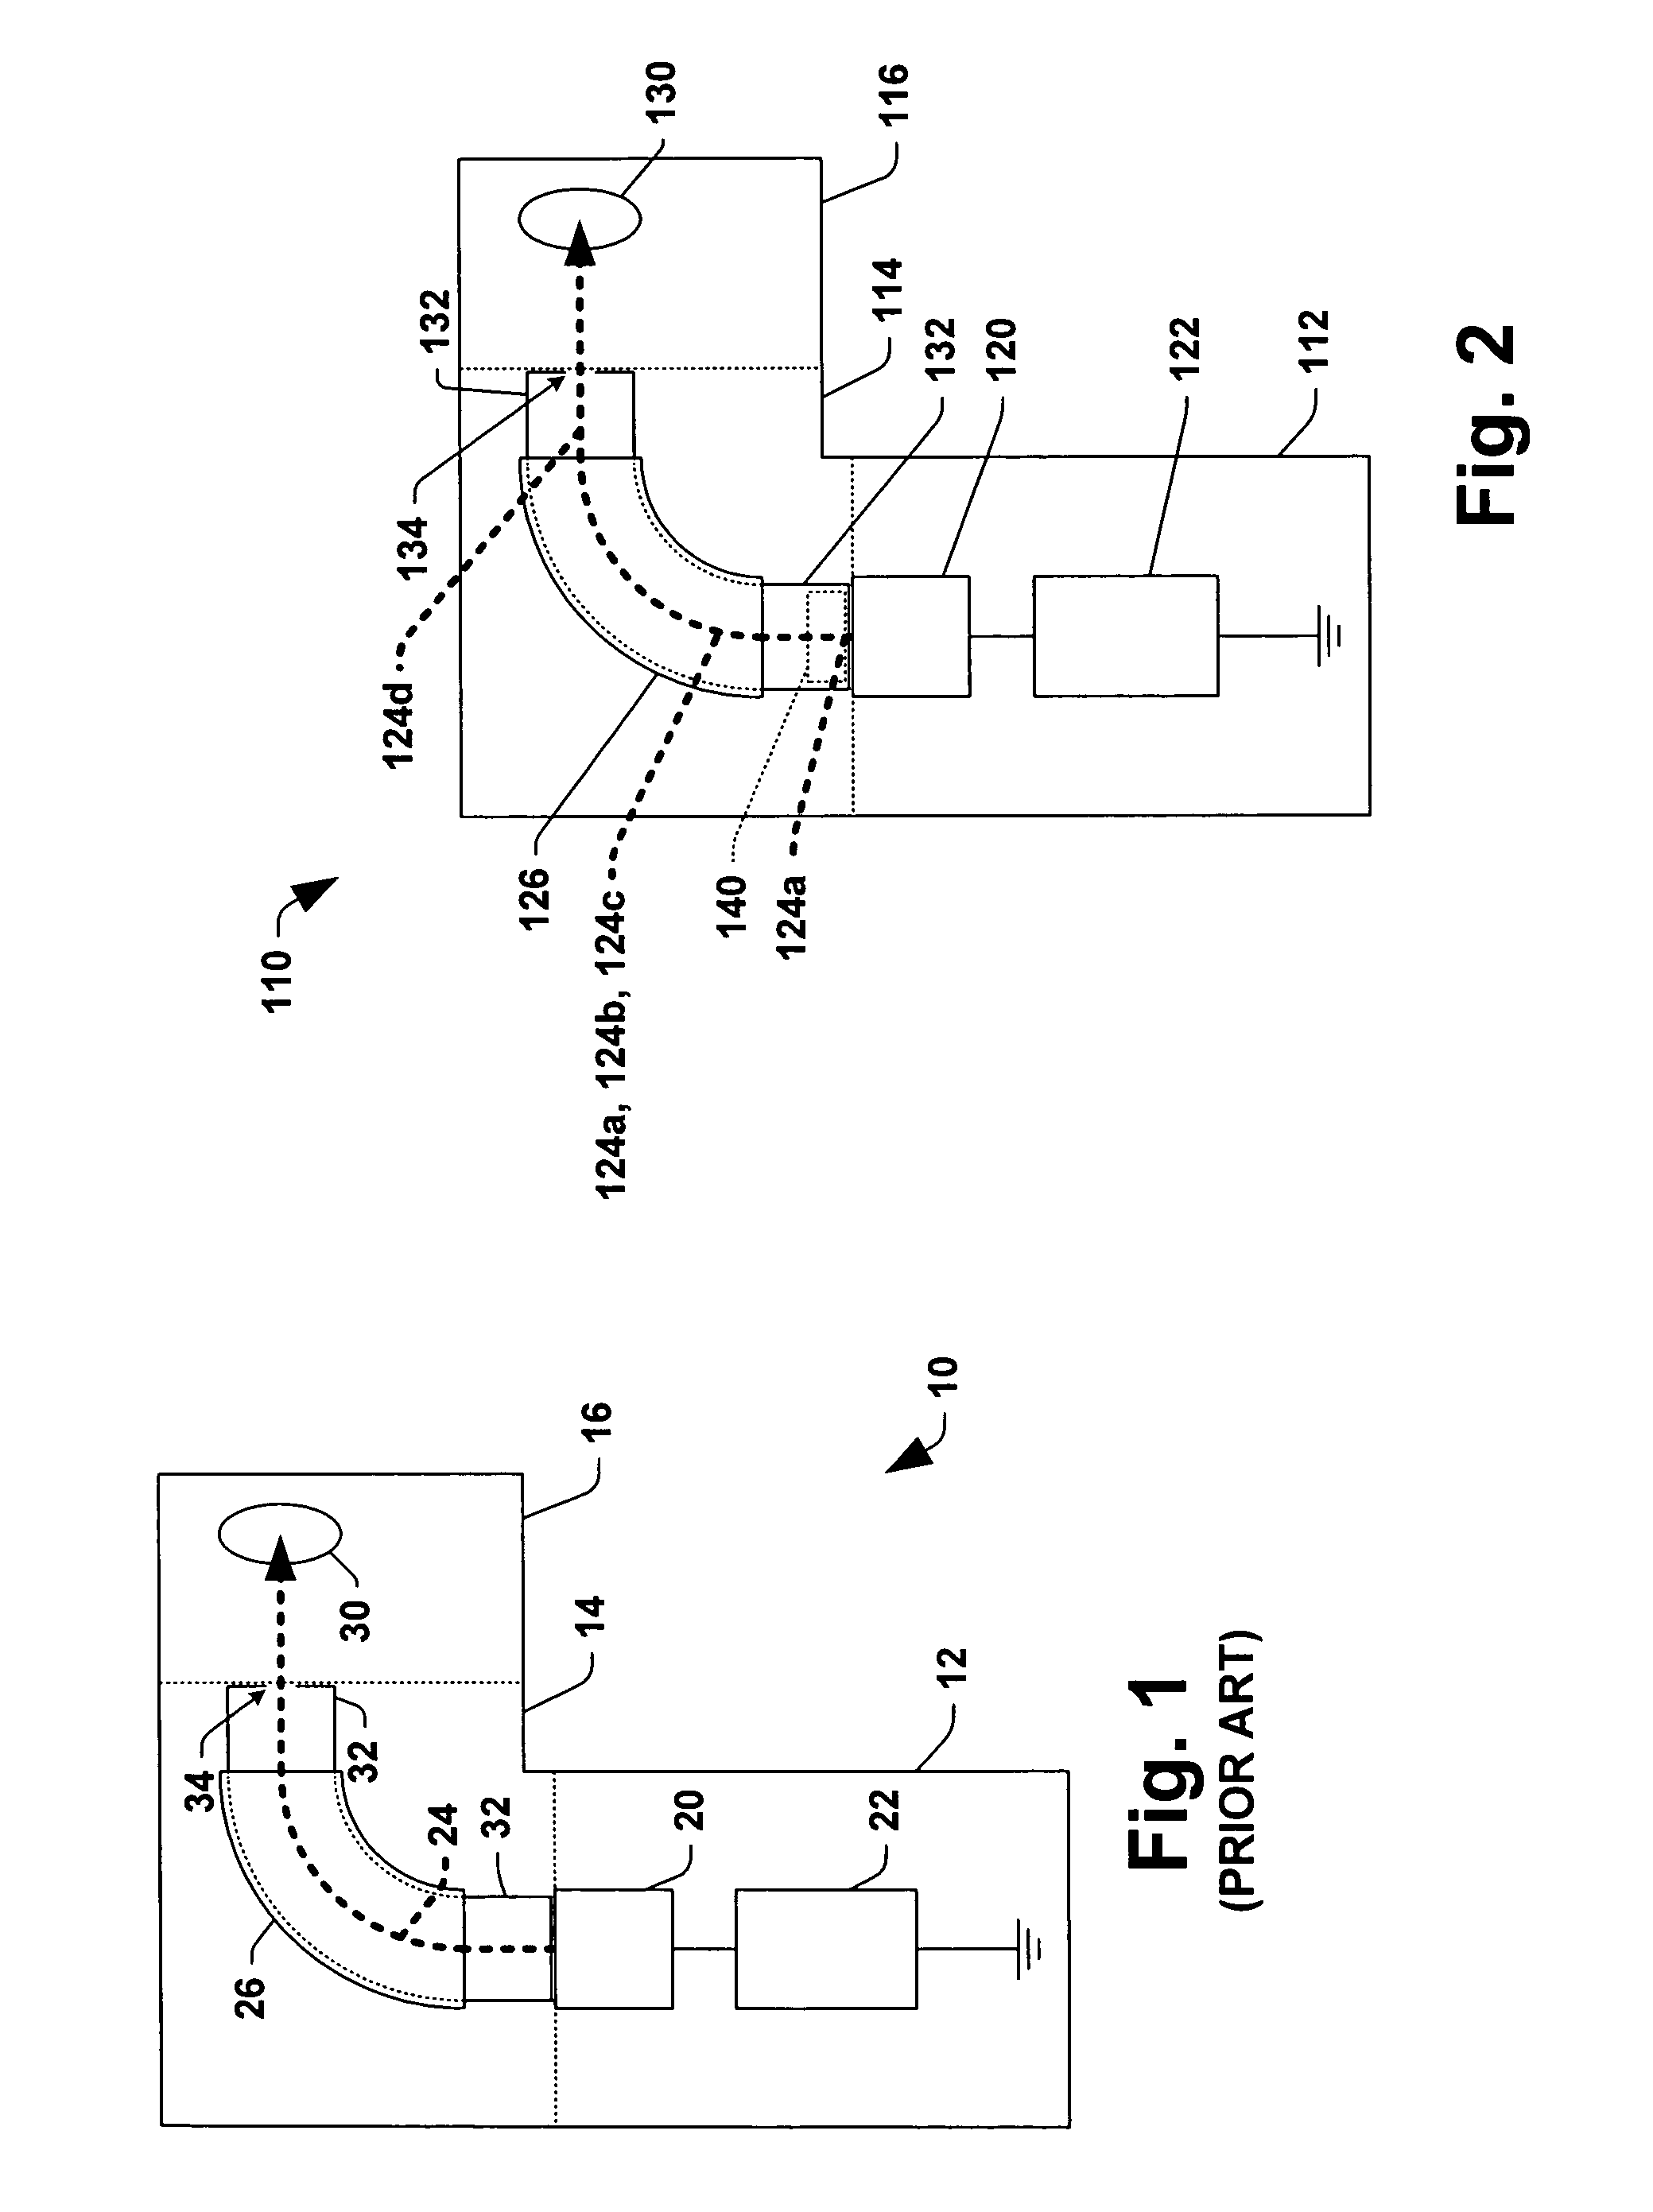 Method and apparatus for selective pre-dispersion of extracted ion beams in ion implantation systems